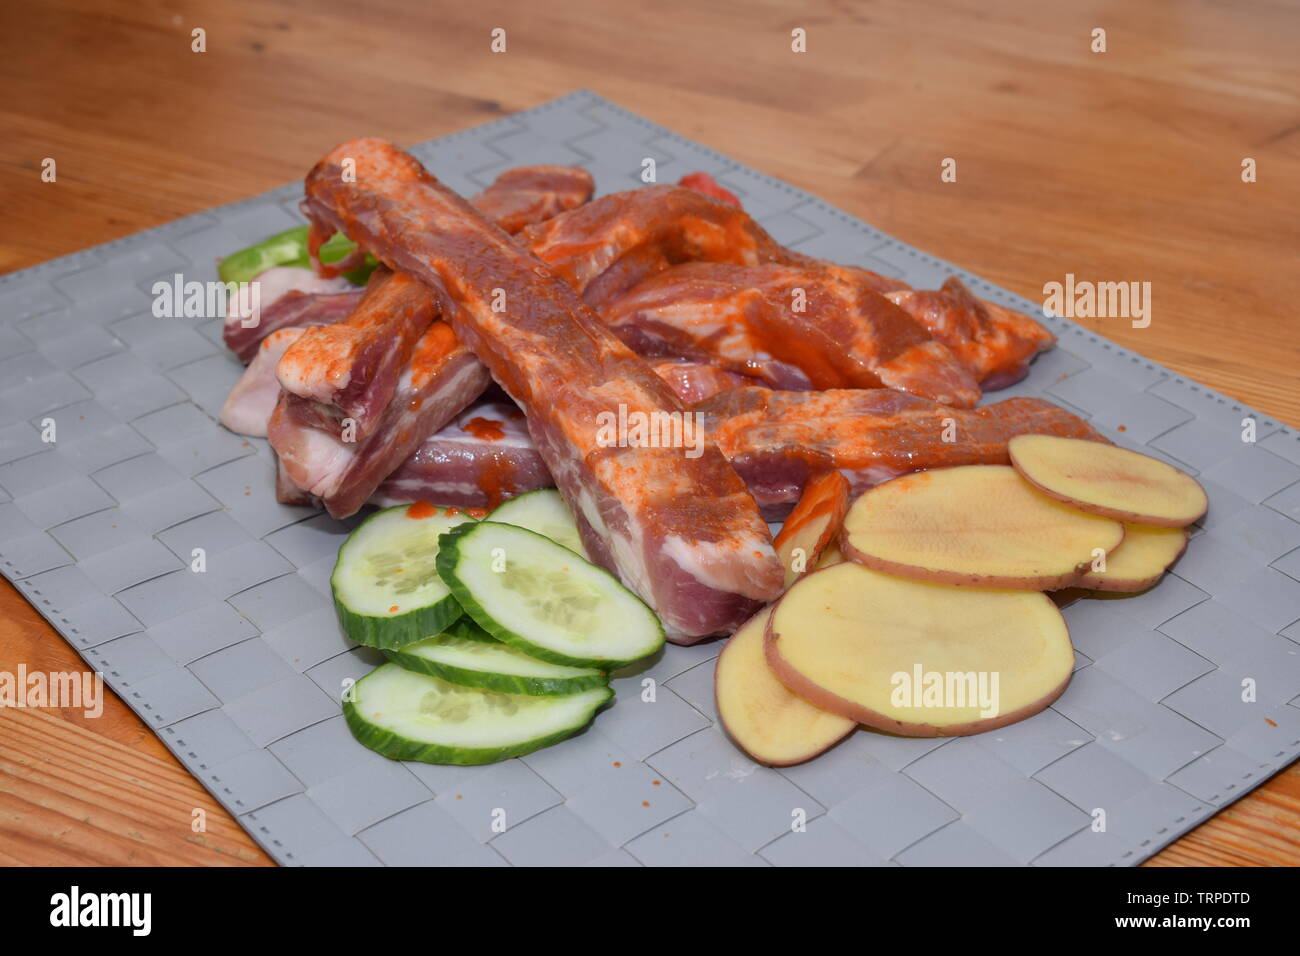 Marinated uncooked pork ribs laid on a clean grey surface with organic sliced vegetables Stock Photo